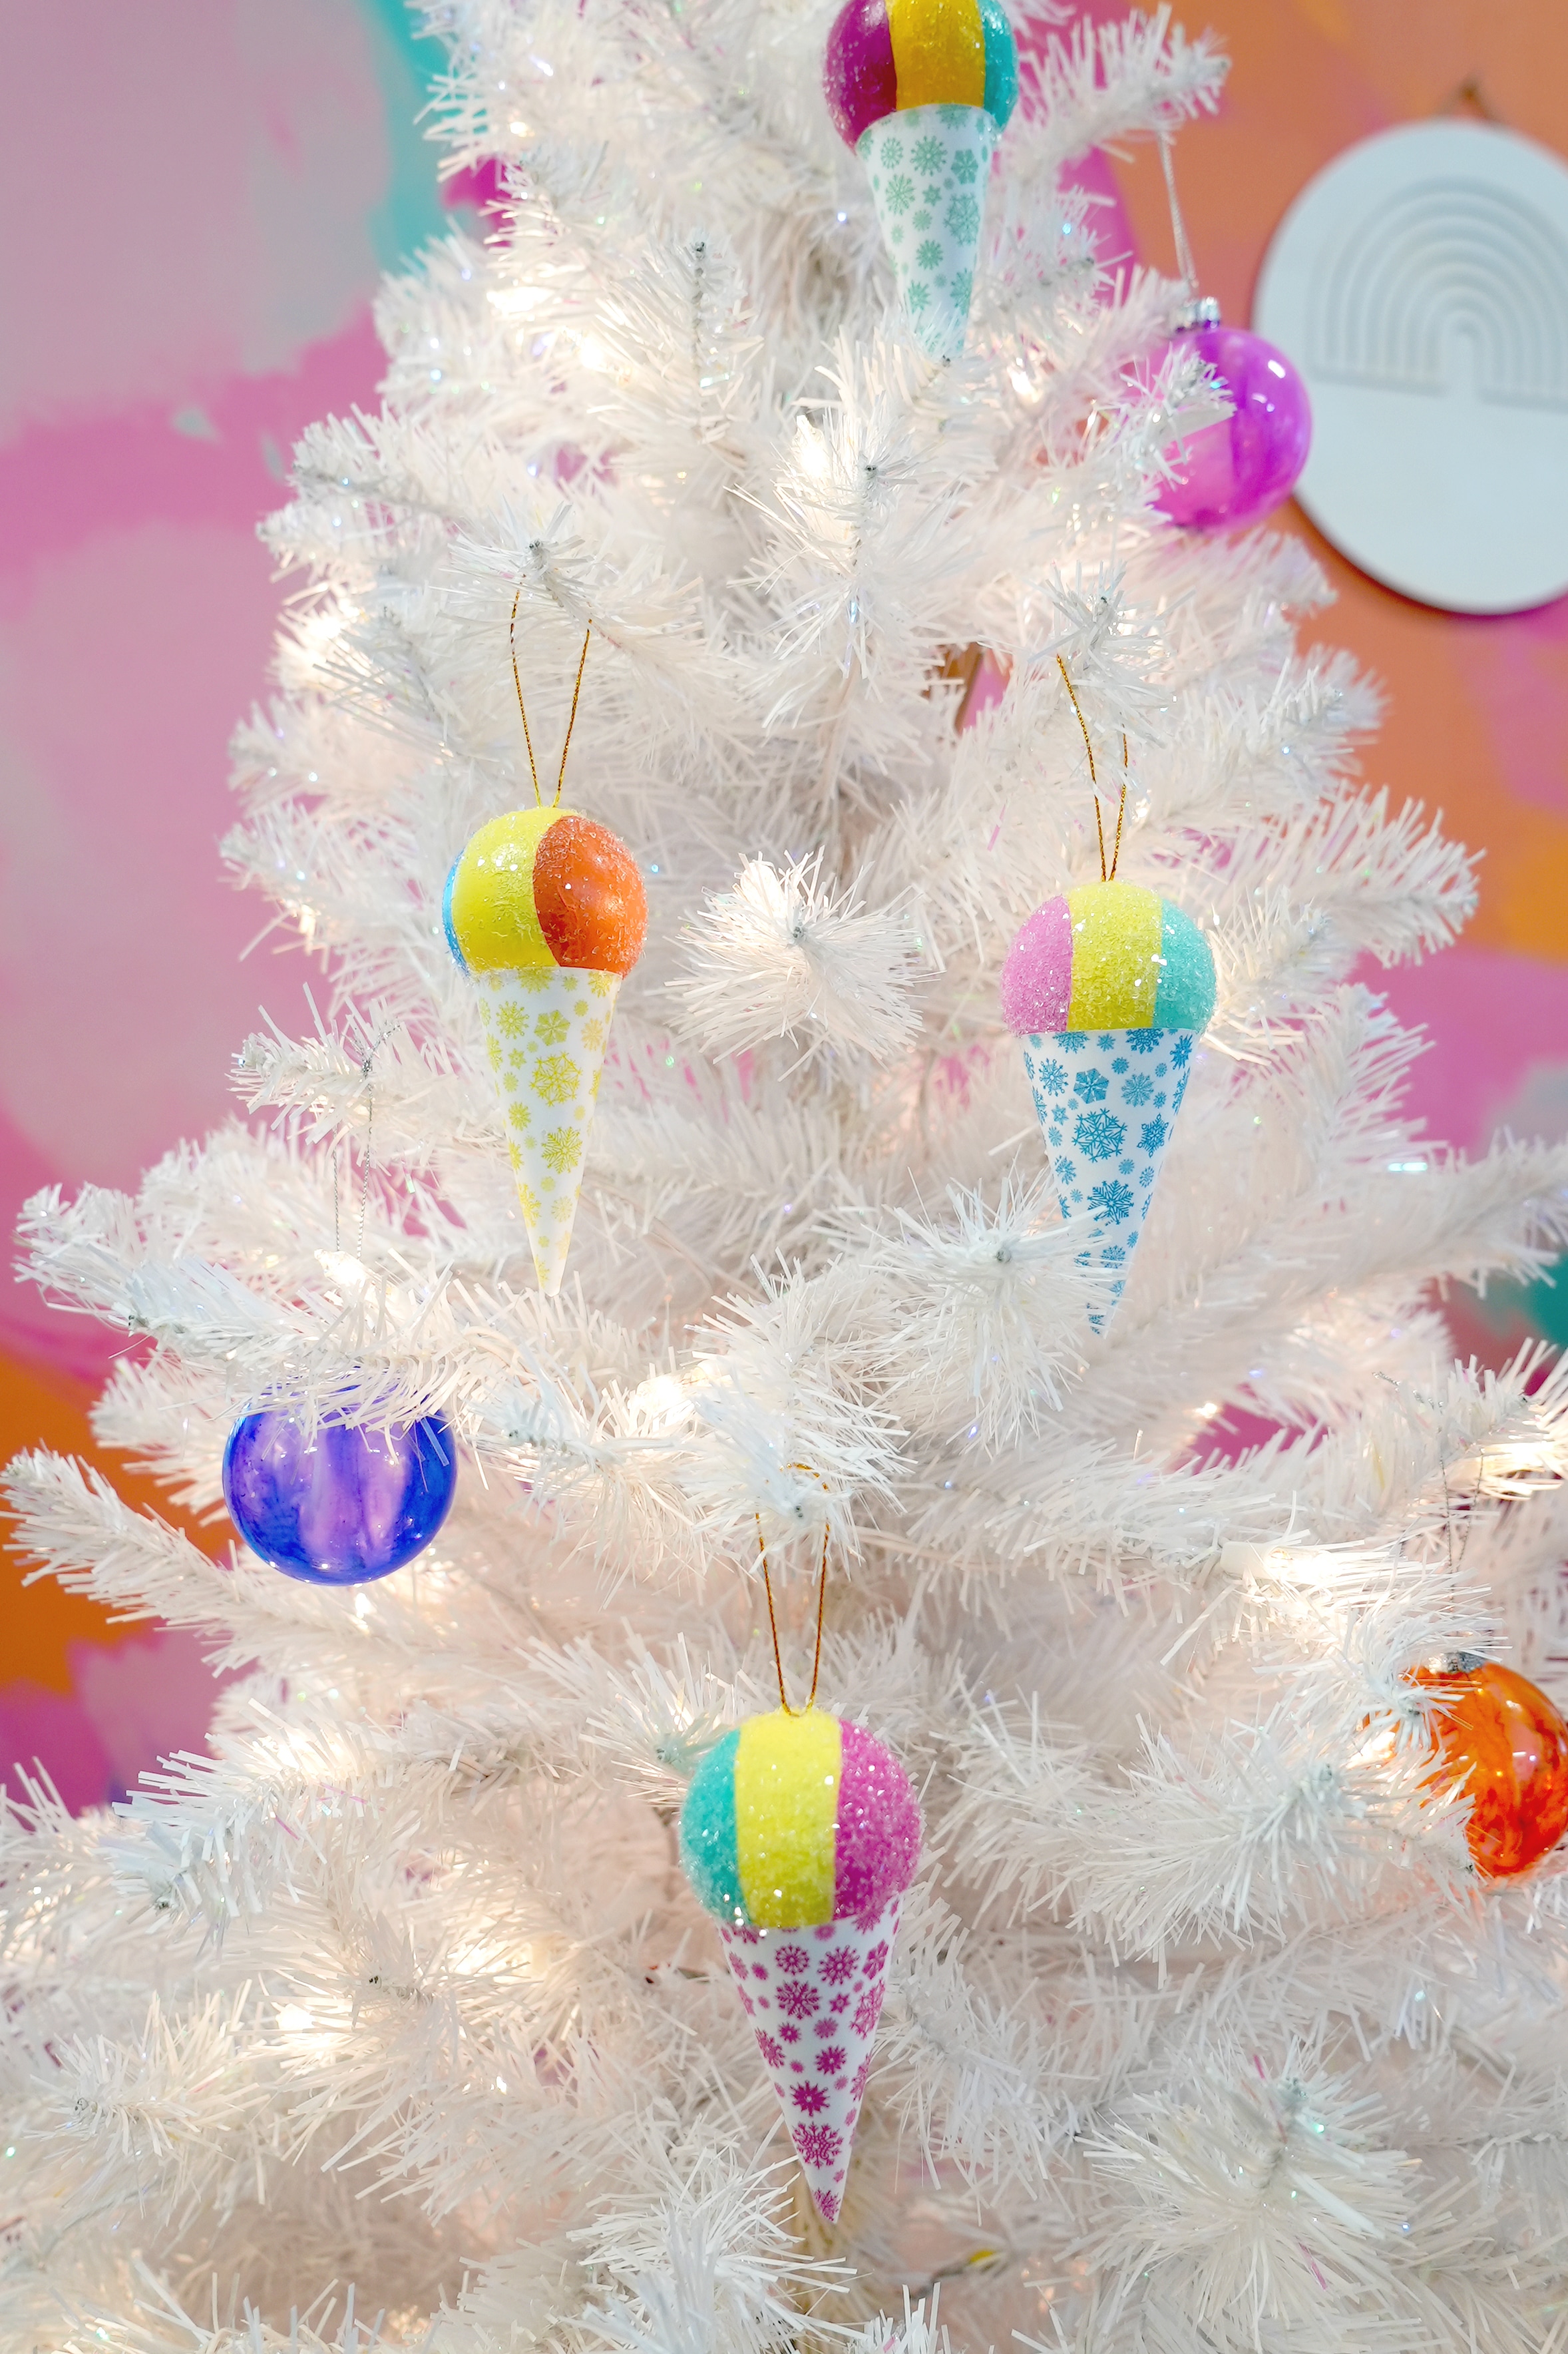 White Christmas tree with colorful snow cone Christmas ornaments